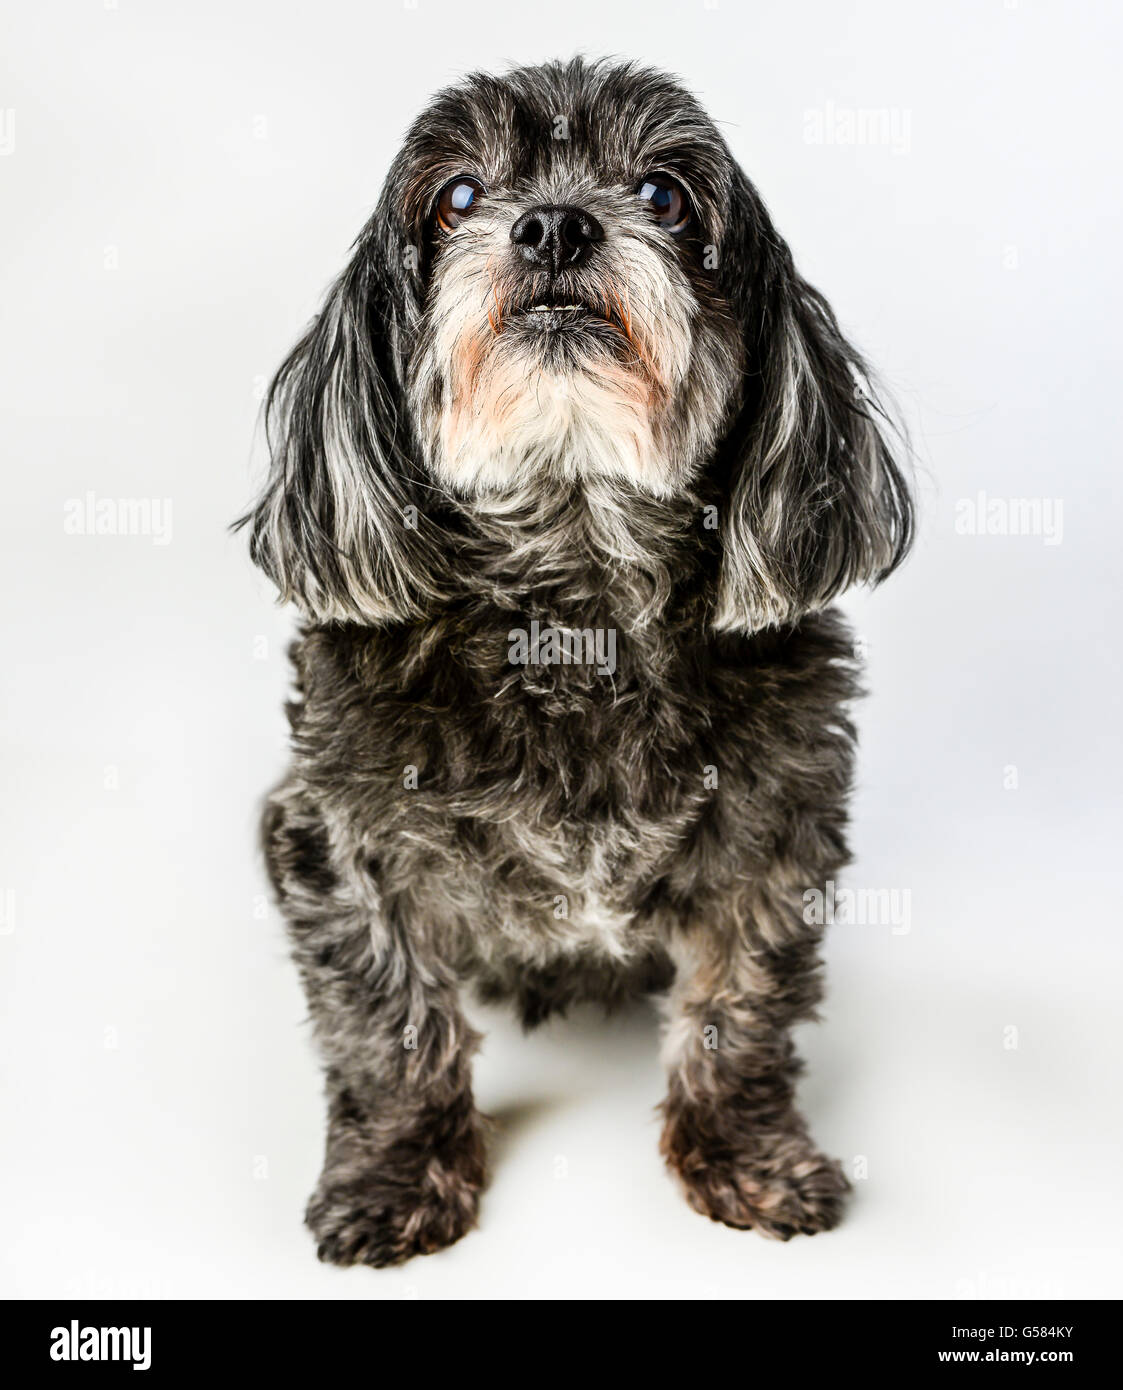 An adorable dark tri-colored mixed breed small dog posing with curious expression possibly awaiting a treat, on white background Stock Photo